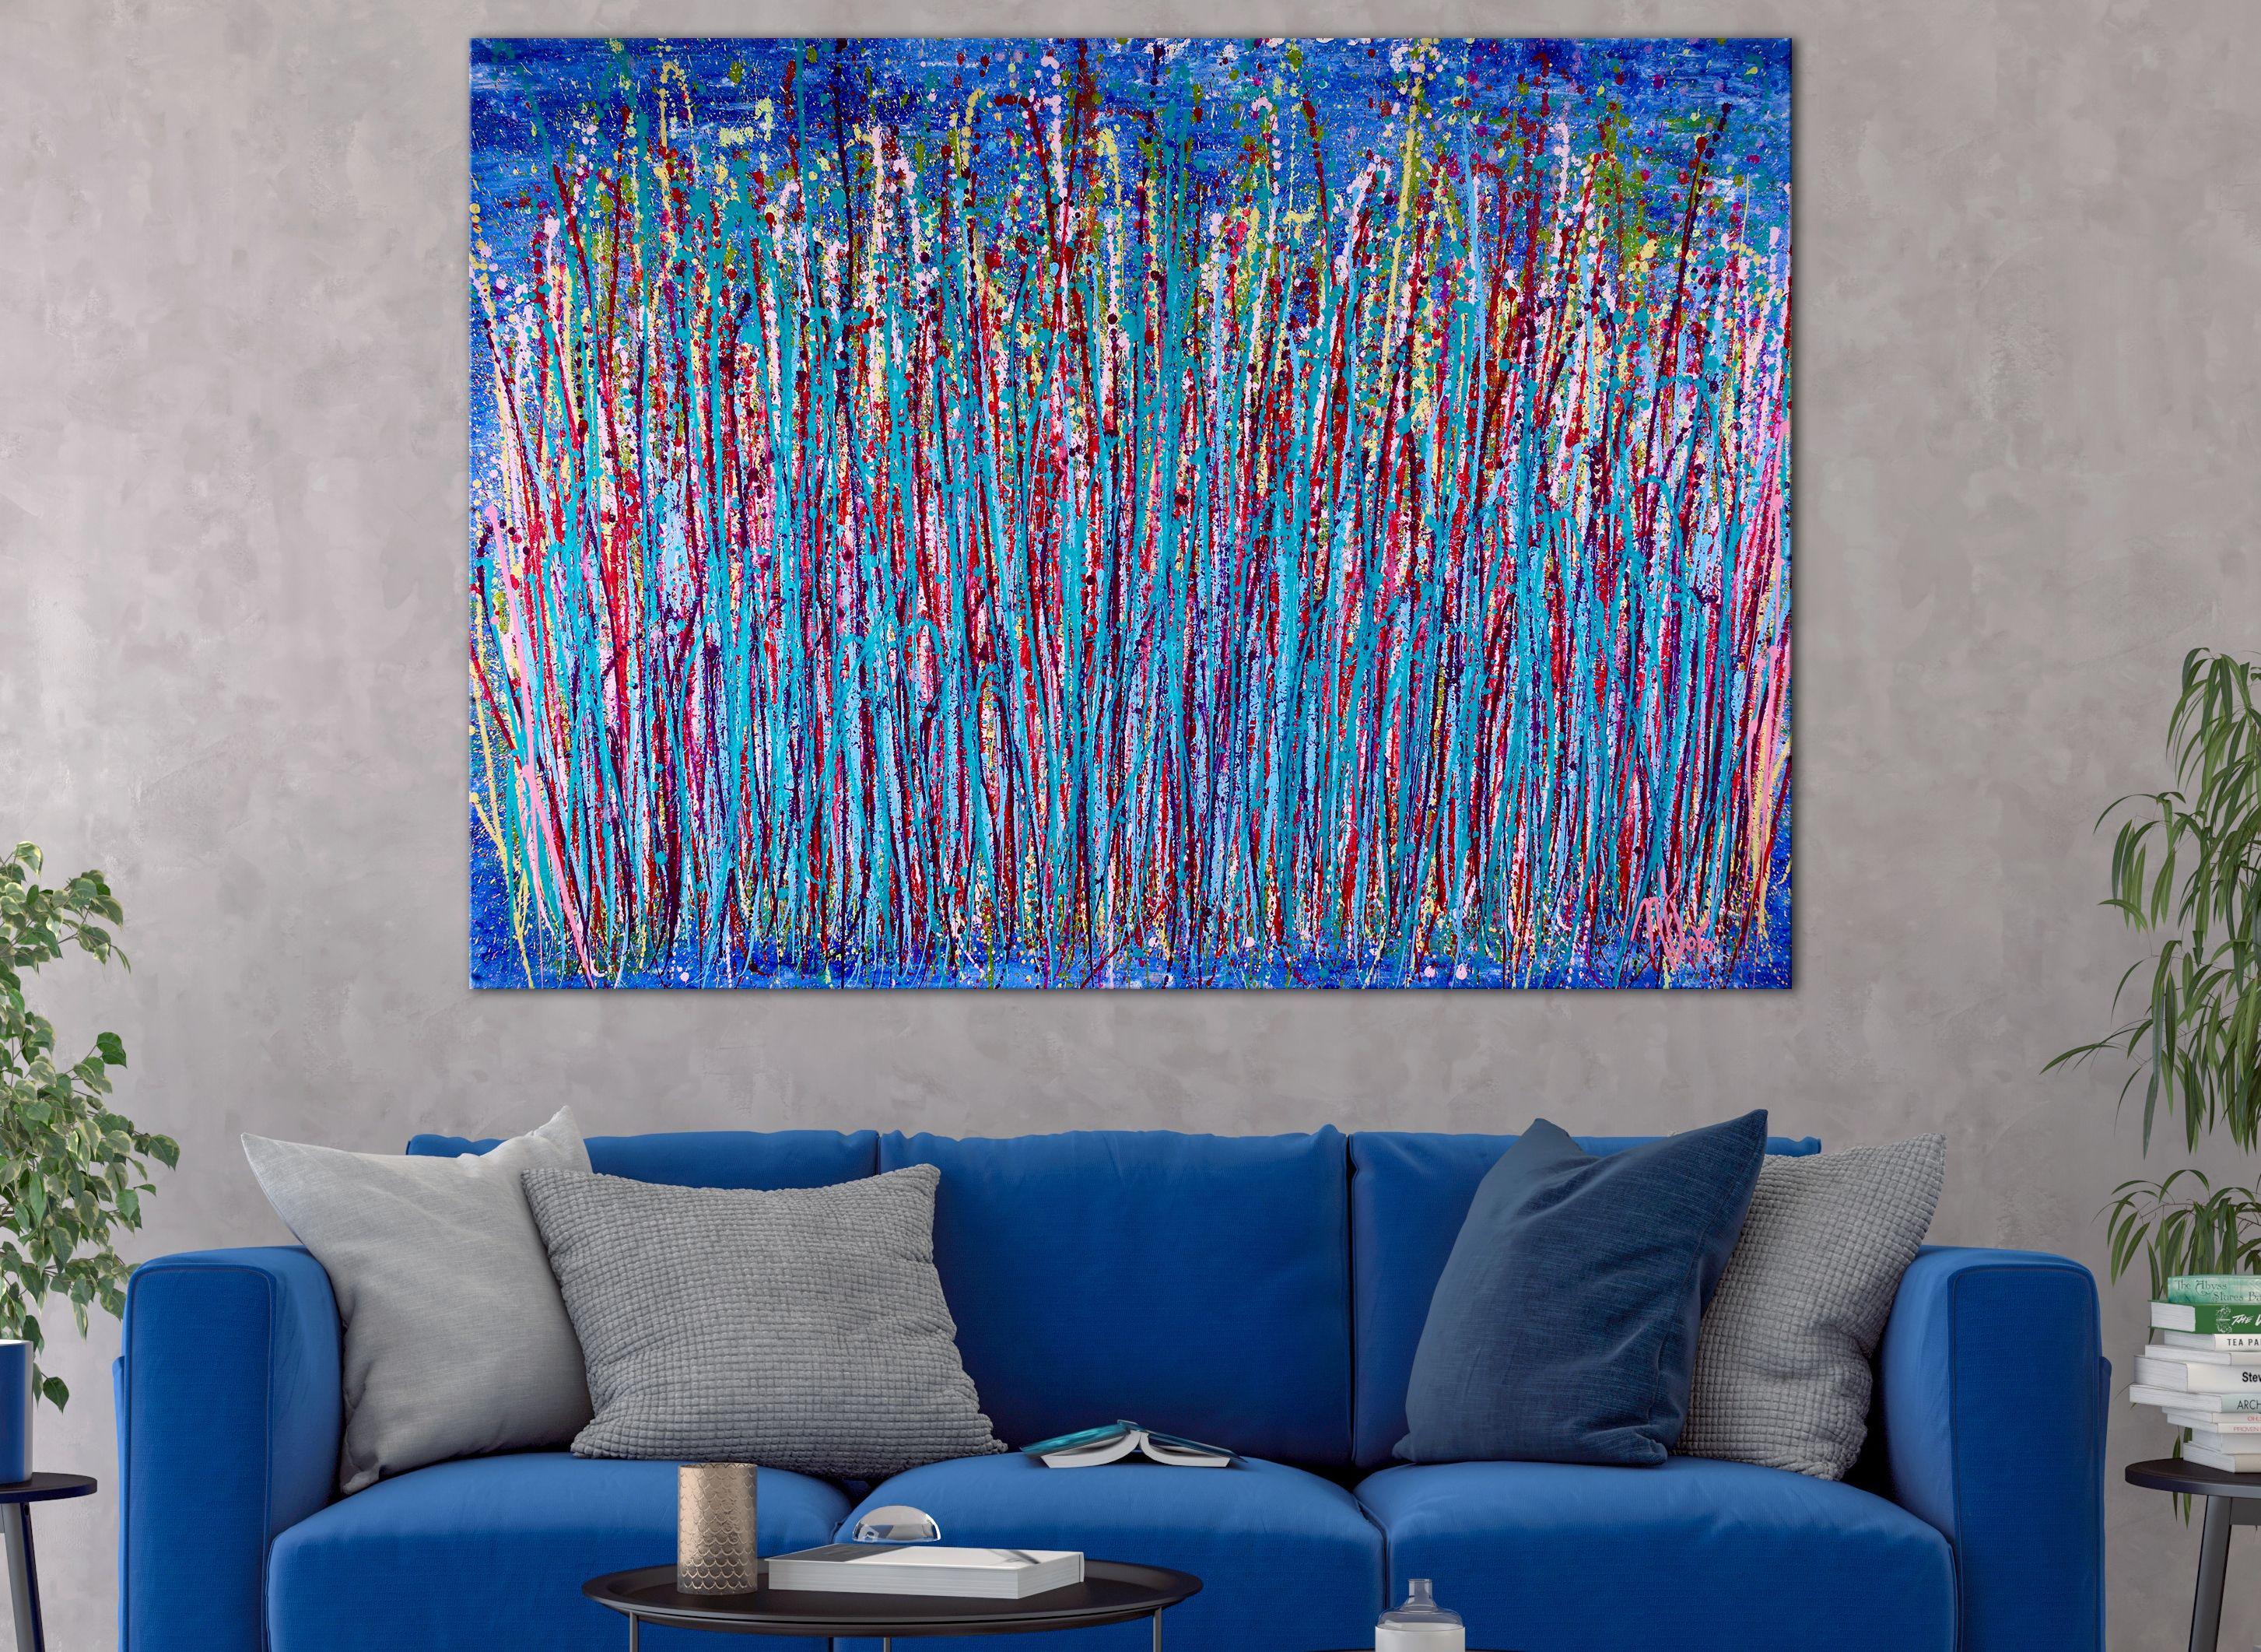 Reflective and iridescent! Rich colors with lots of light coming from blue background. bold expressionistic painting, many color from pink to iridescent purple, red, sky blue, olive green and pale yellow. Action packed artwork all paint strokes in a